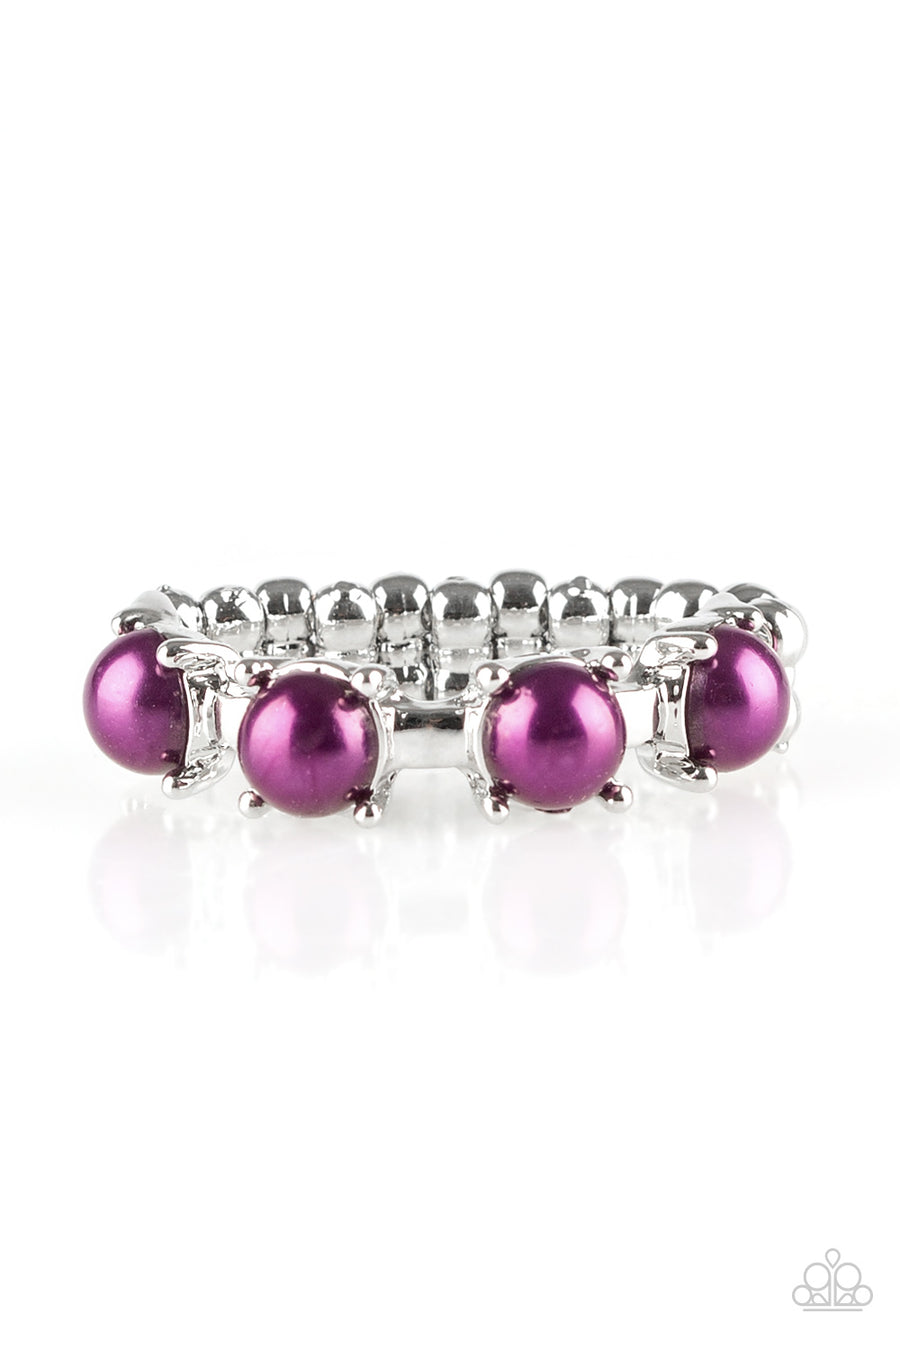 More Or PRICELESS - Purple Bead Ring - Paparrazi Accessories